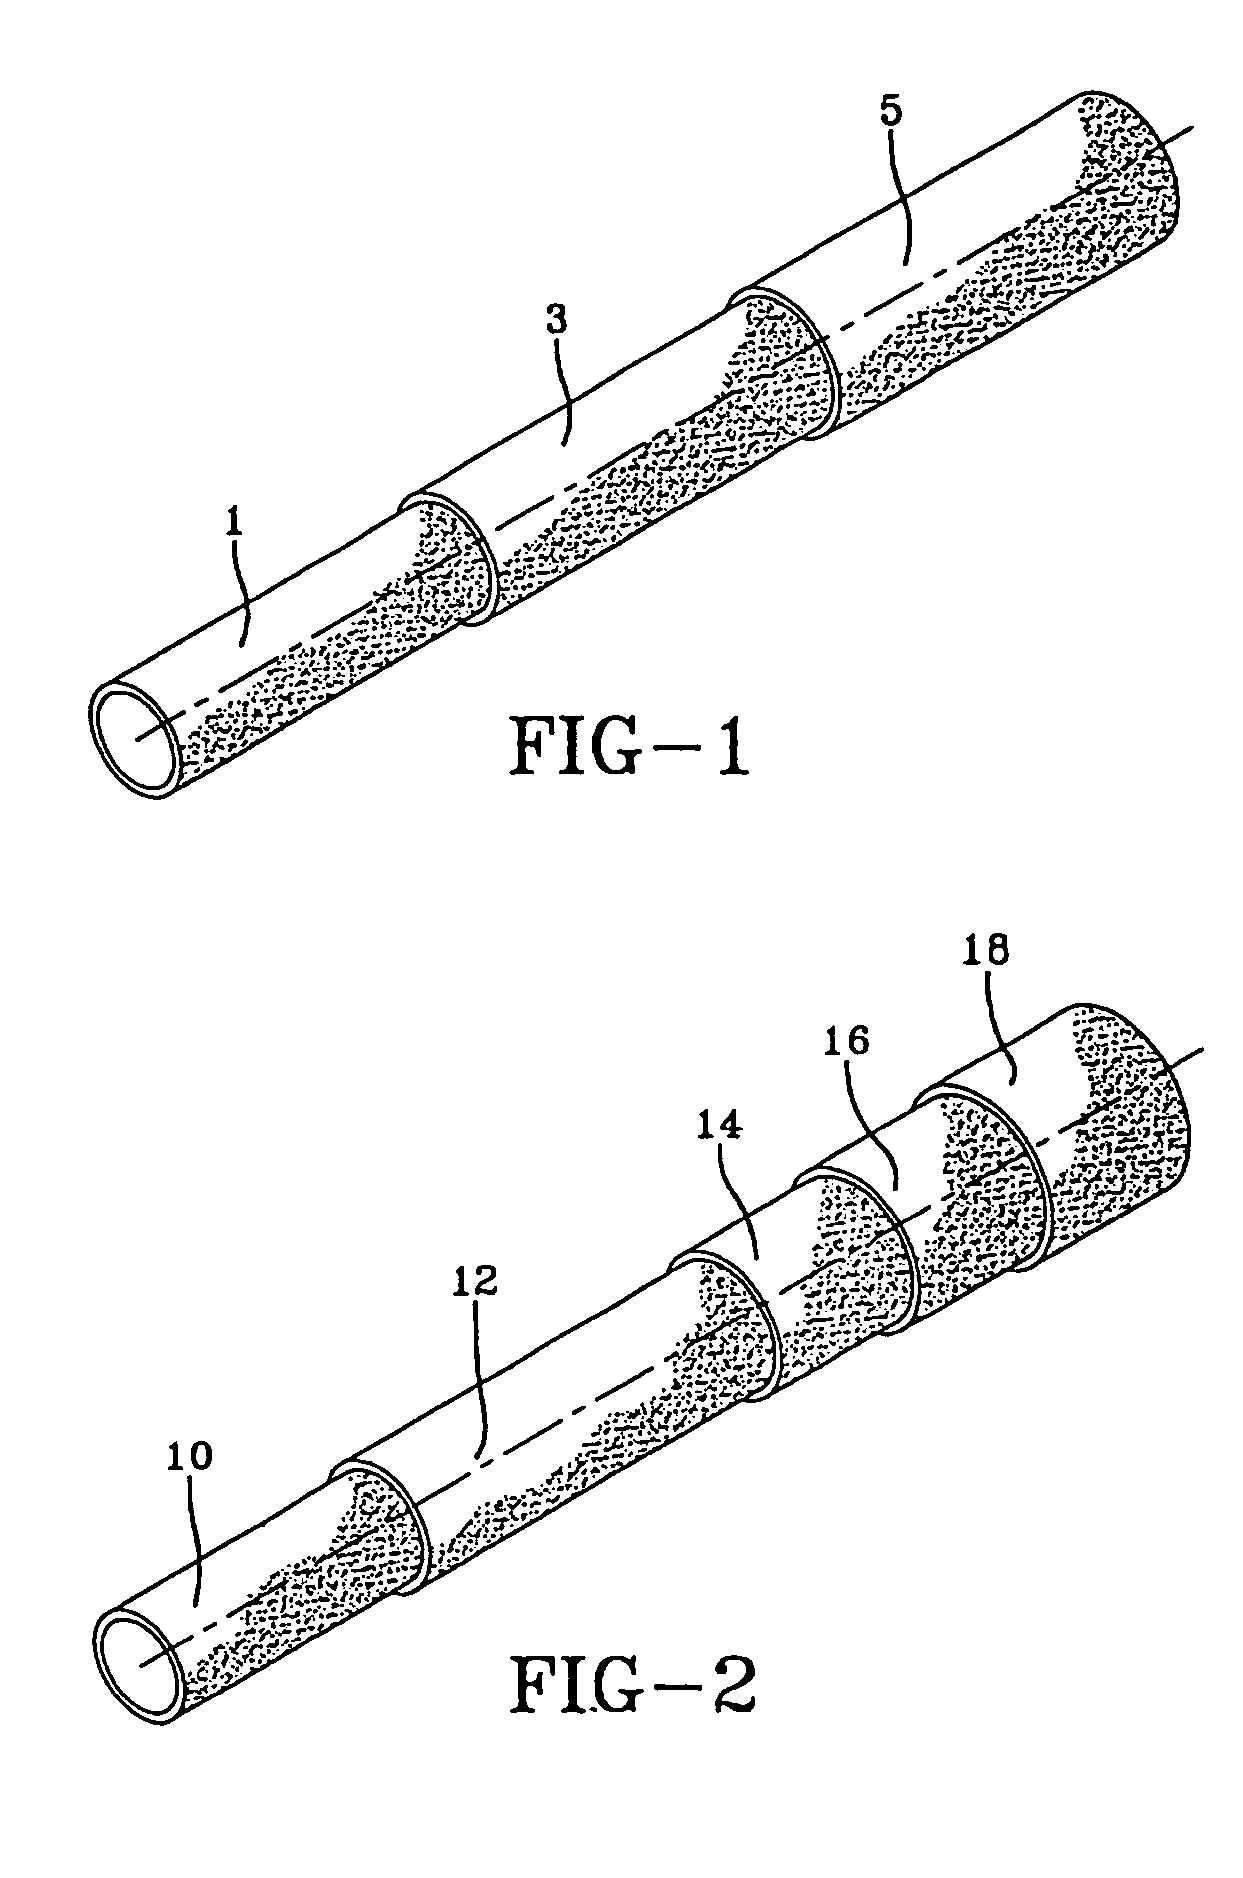 Hose construction containing NBR elastomer composition and fluoroplastic barrier